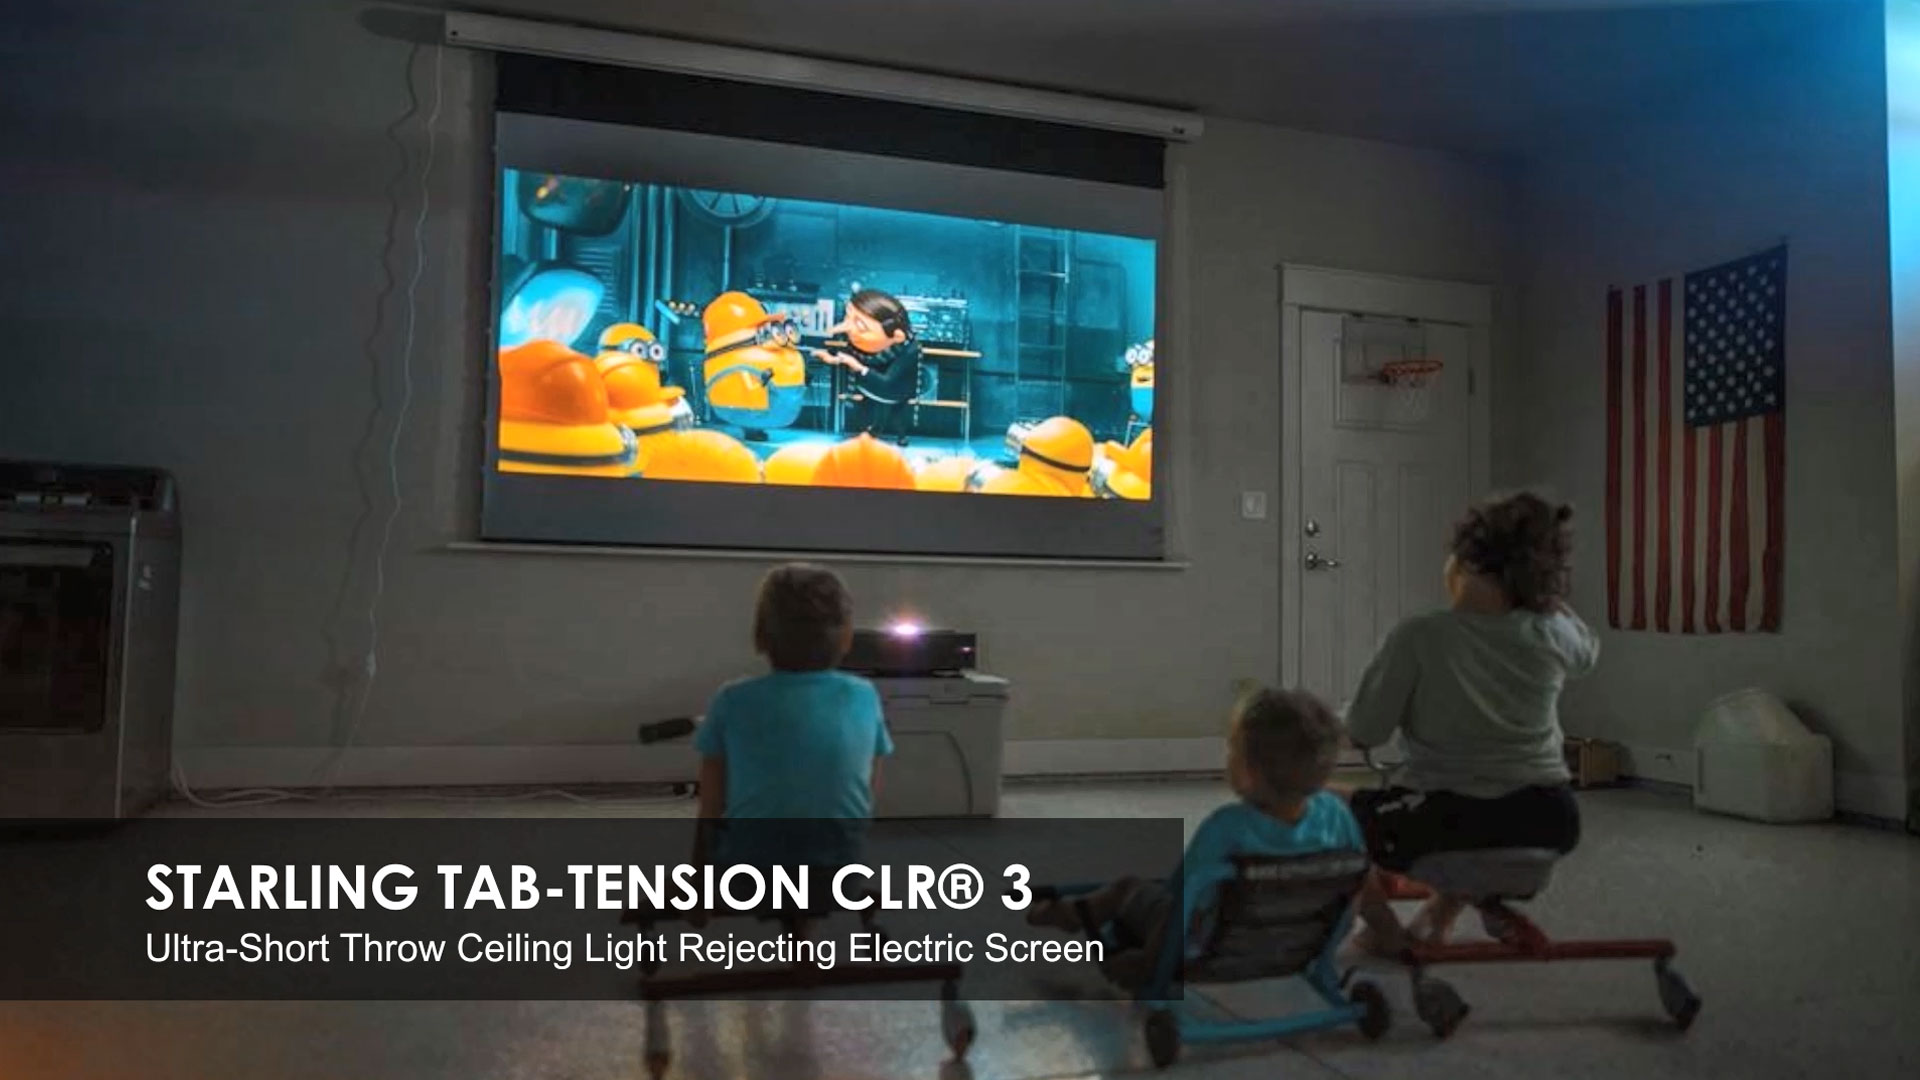 Starling Tab-Tension CLR® 3 Electric Ceiling Ambient Light Rejecting Projector Screen